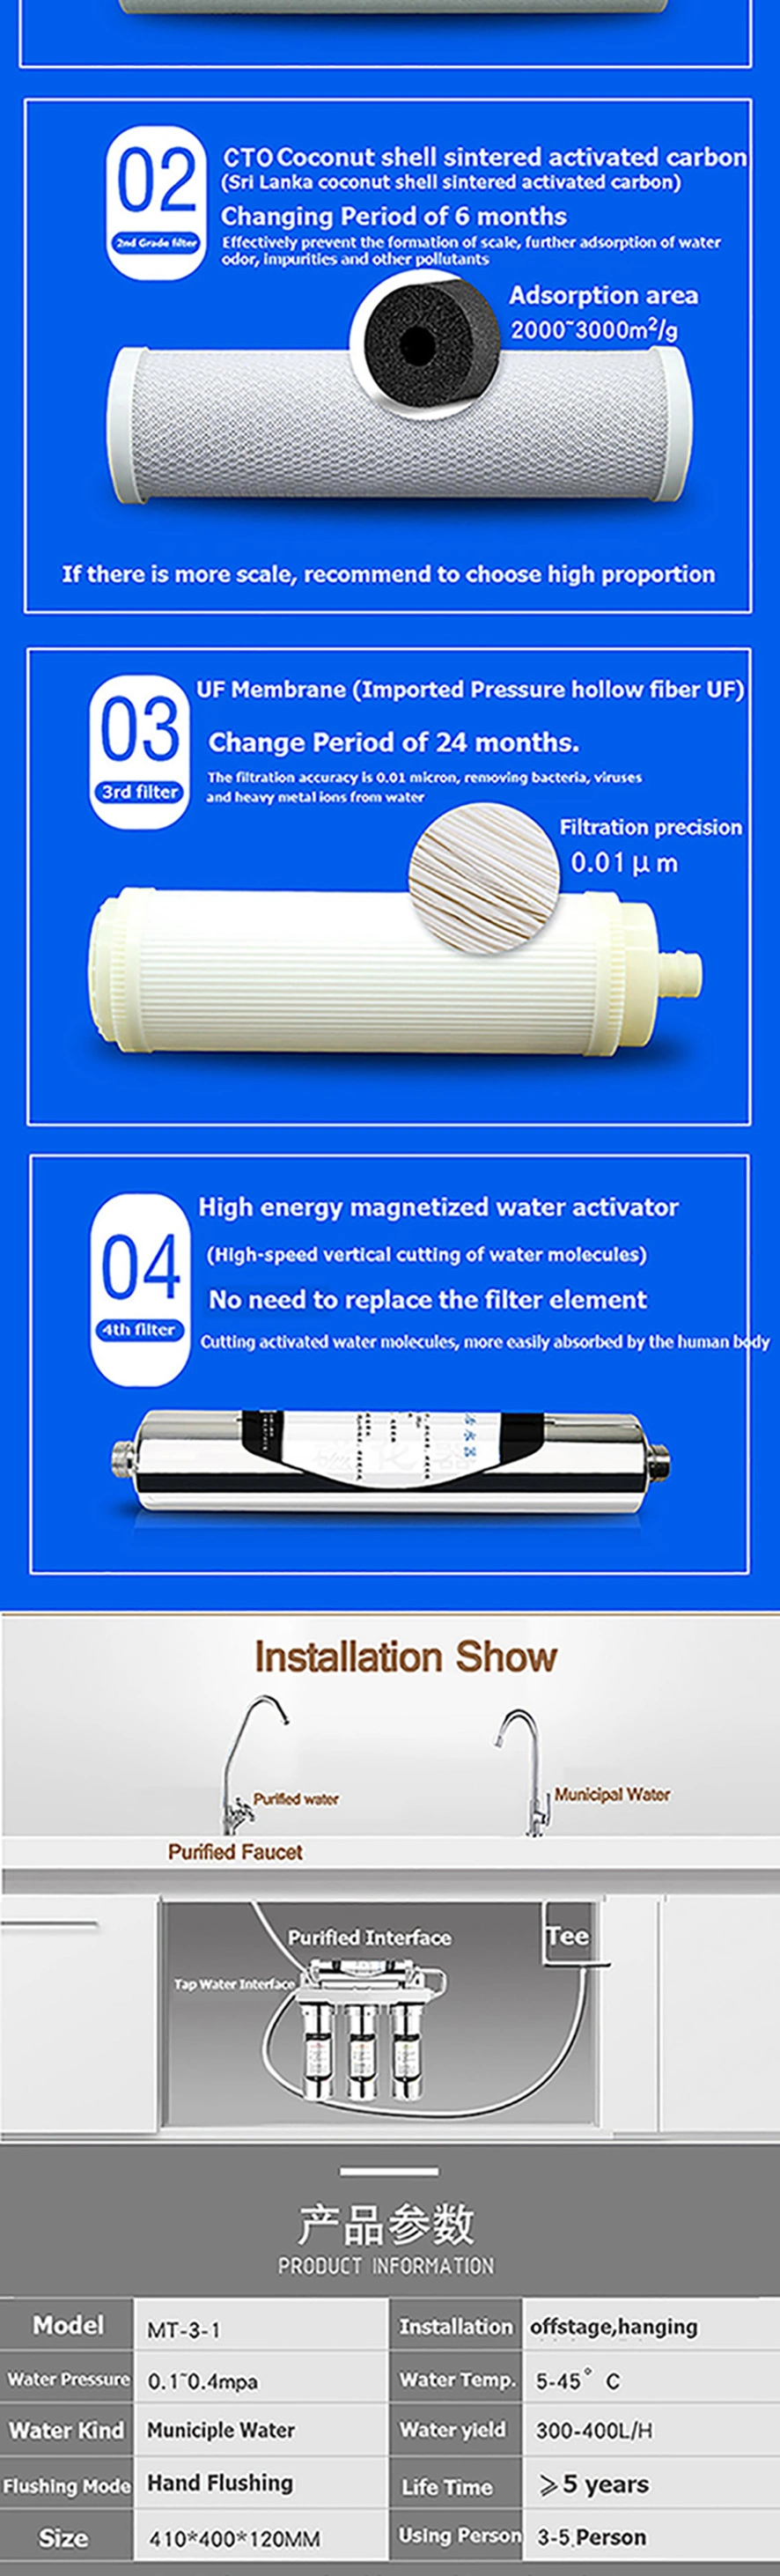 Whole House Stainless Steel Water Filter UF Membrane Water Purifier